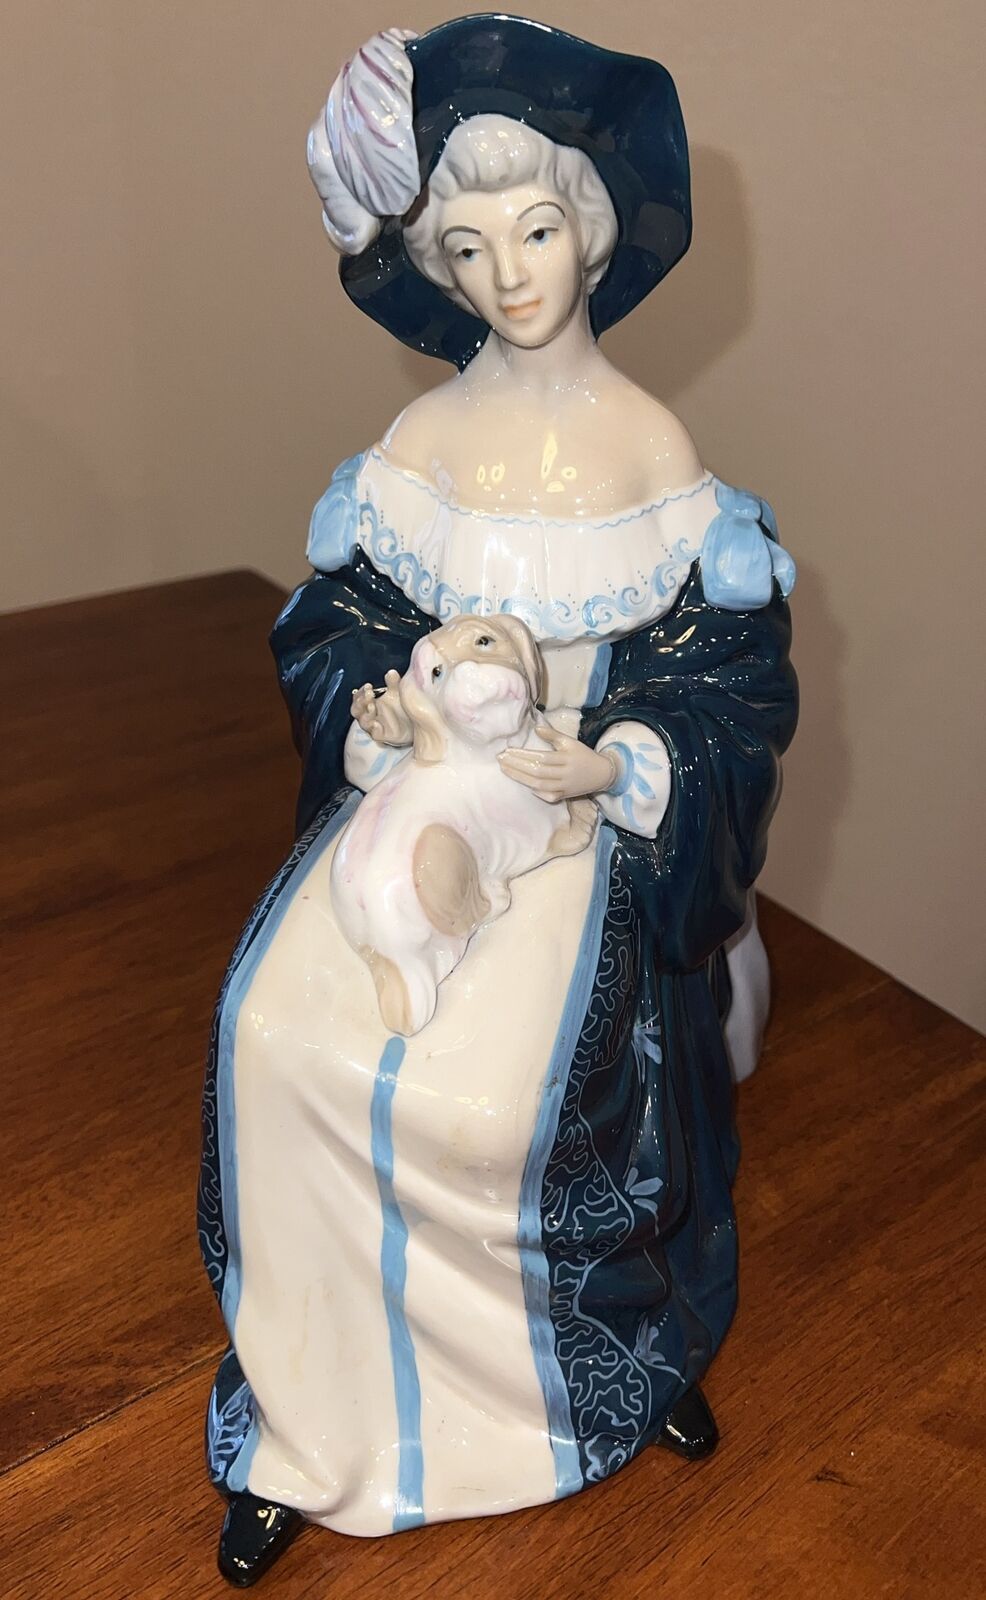 Vintage GAMA Figurine, Lady In Chair With Dog On Her Lap, Porcelain Beautiful